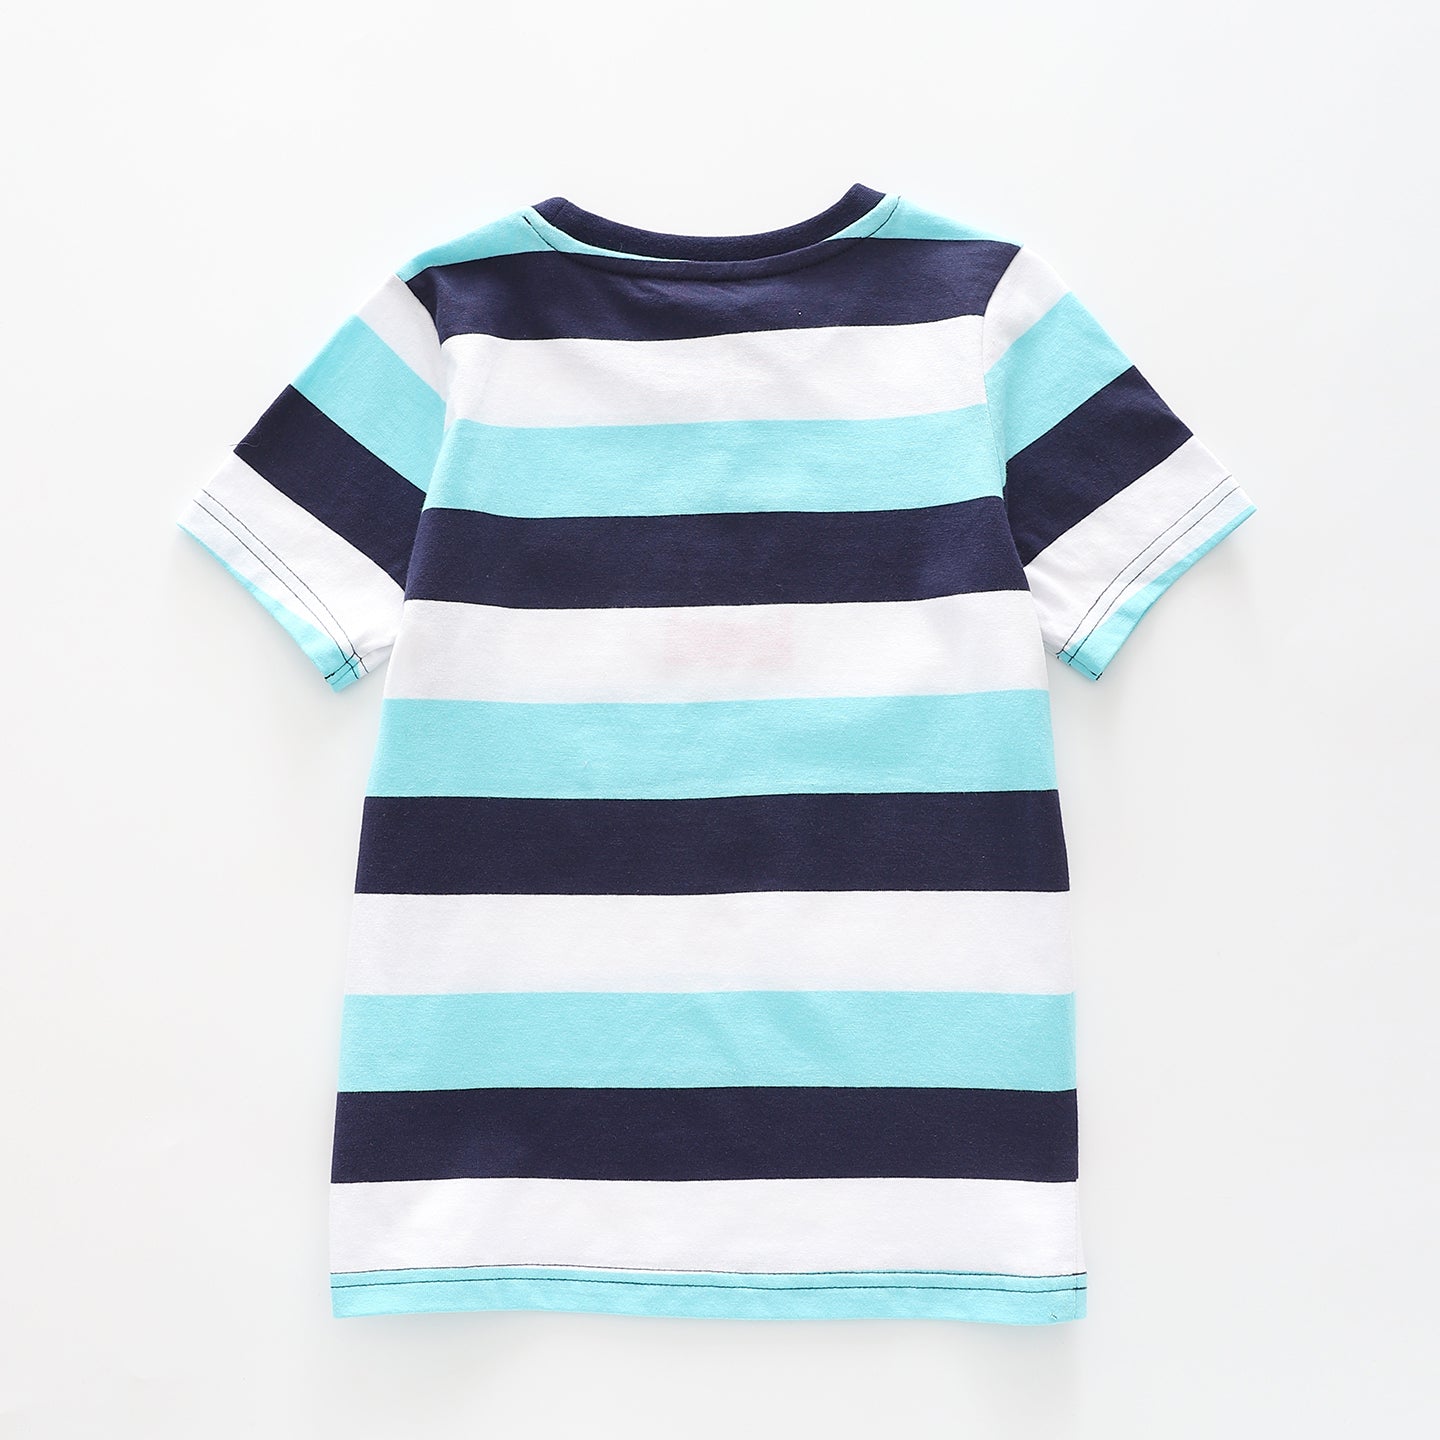 Boy's Navy and Sky Blue Striped T-Shirt